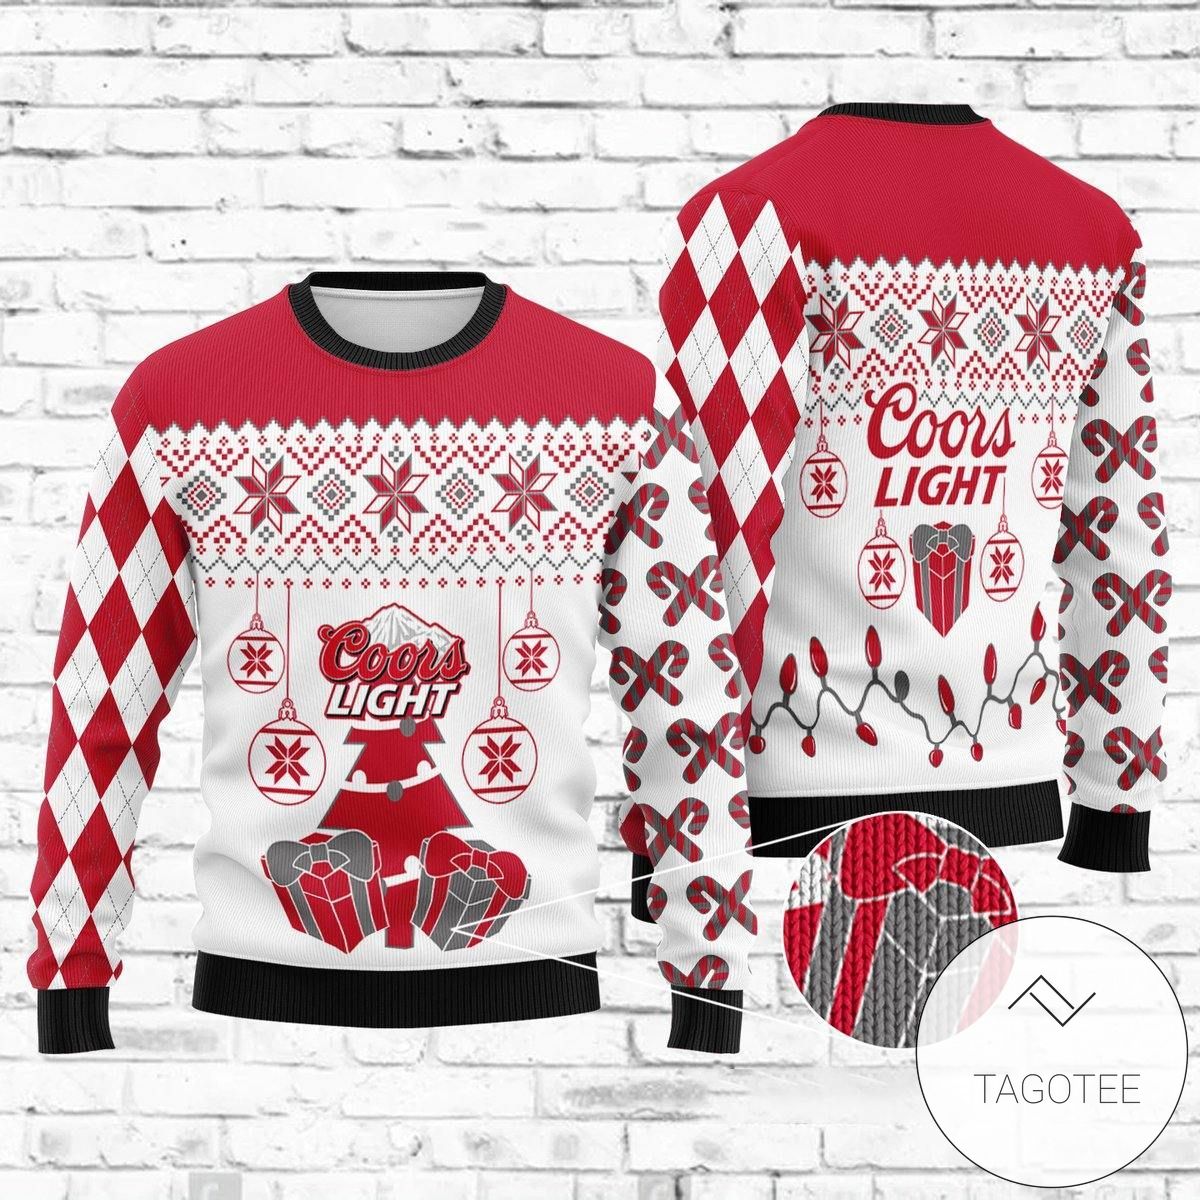 New 2021 Coors Light Christmas Holiday Ugly Sweater